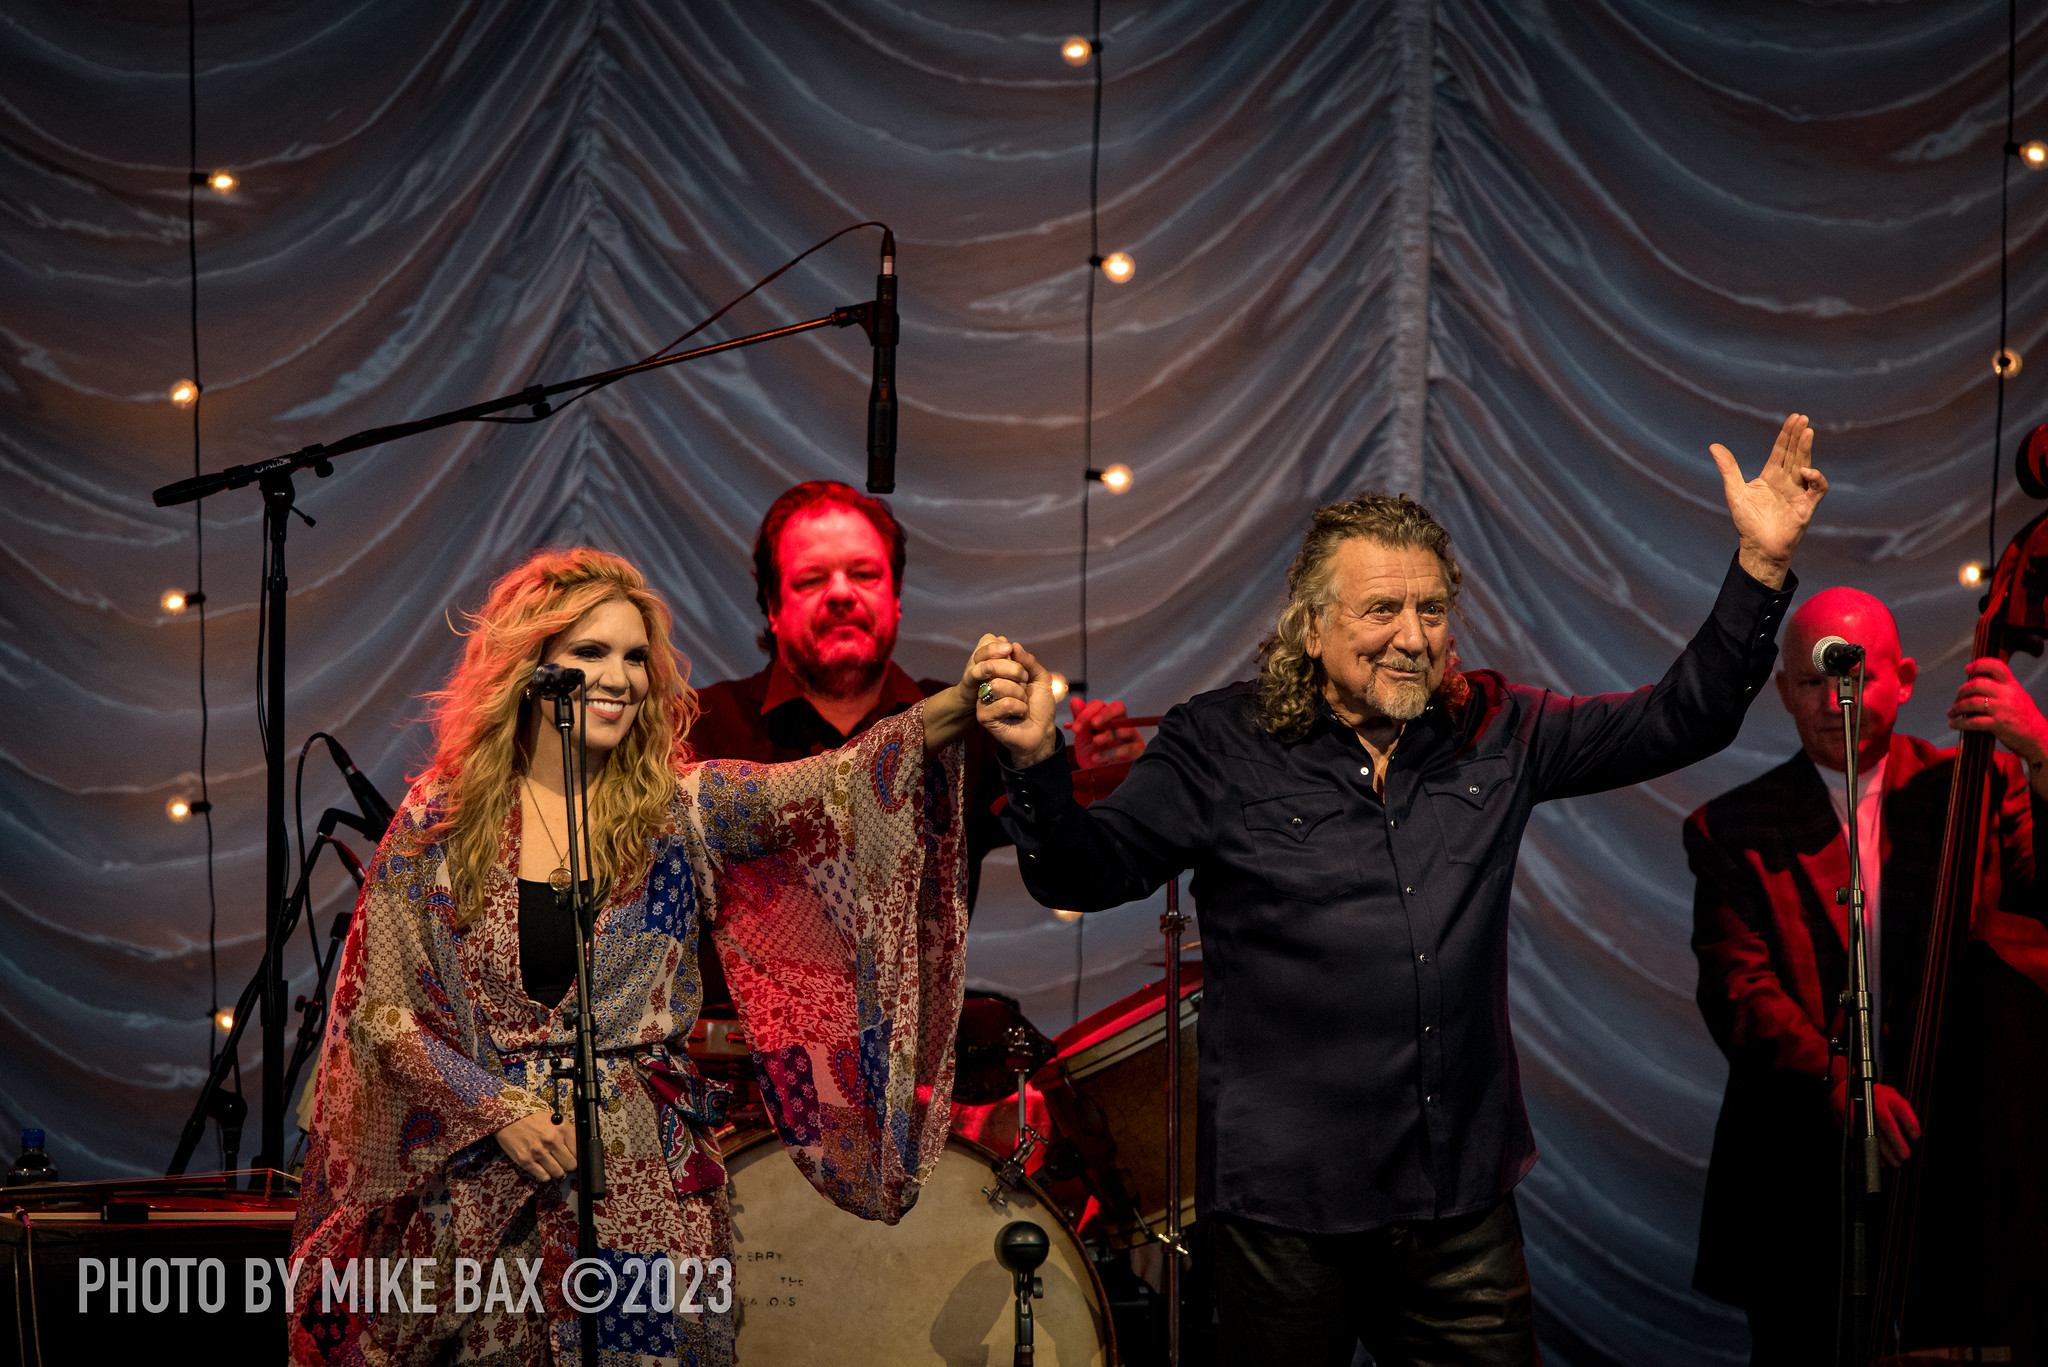 Robert Plant & Alison Krauss on July 5, 2023, photo by Mike Bax